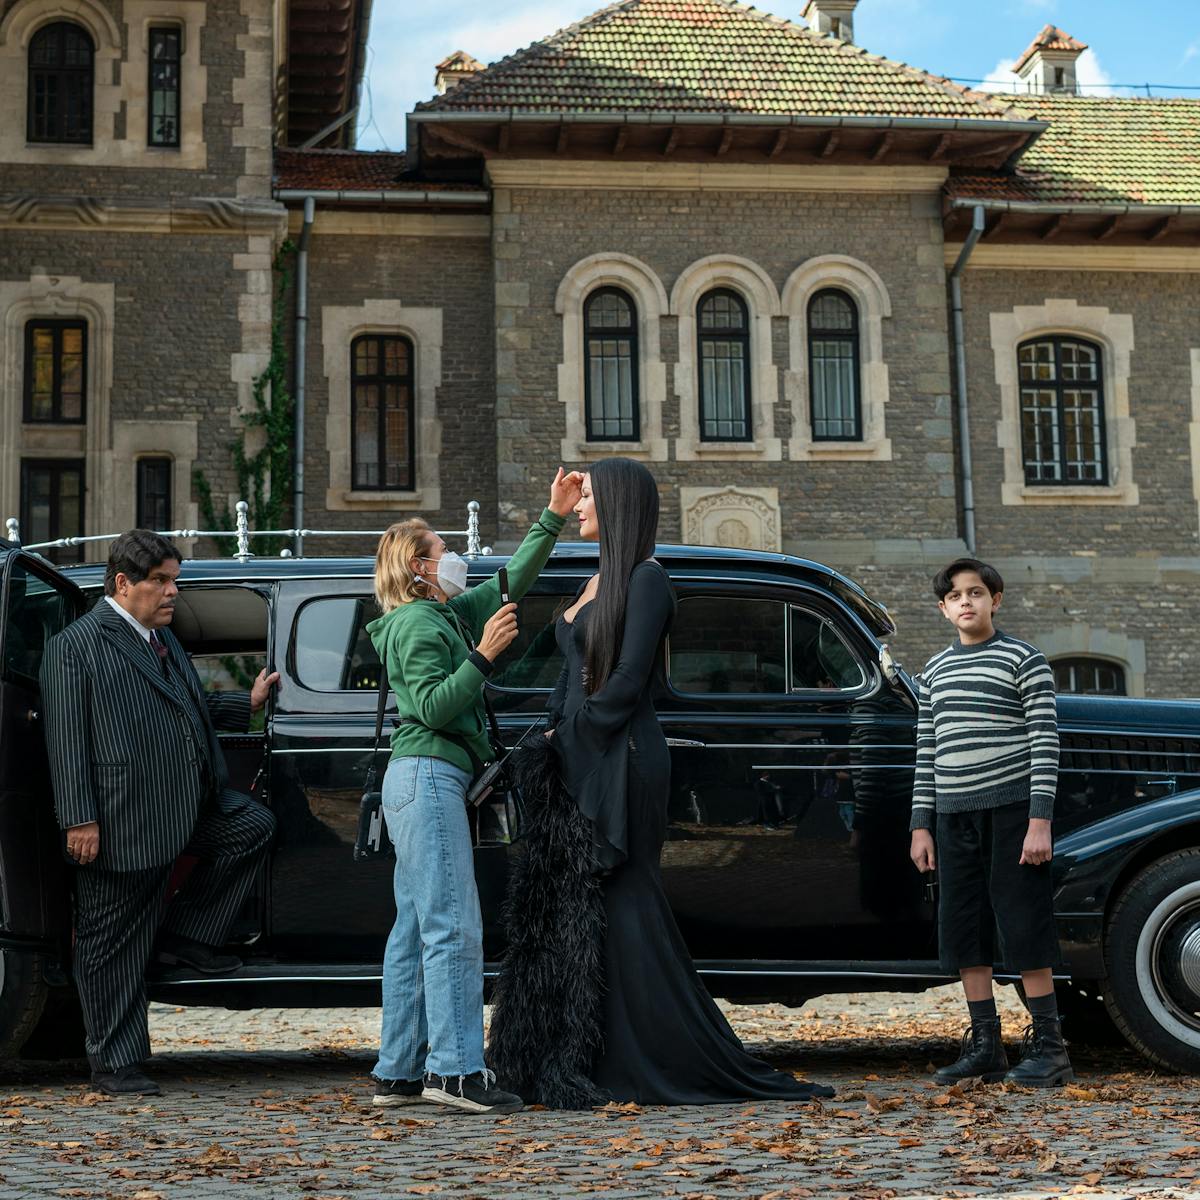 Lurch (George Burcea), Gomez Addams (Luis Guzmán), Morticia Addams (Catherine Zeta-Jones), and Pugsley Addams (Issac Ordonez) stand outside a limo at Nevermore Academy.  